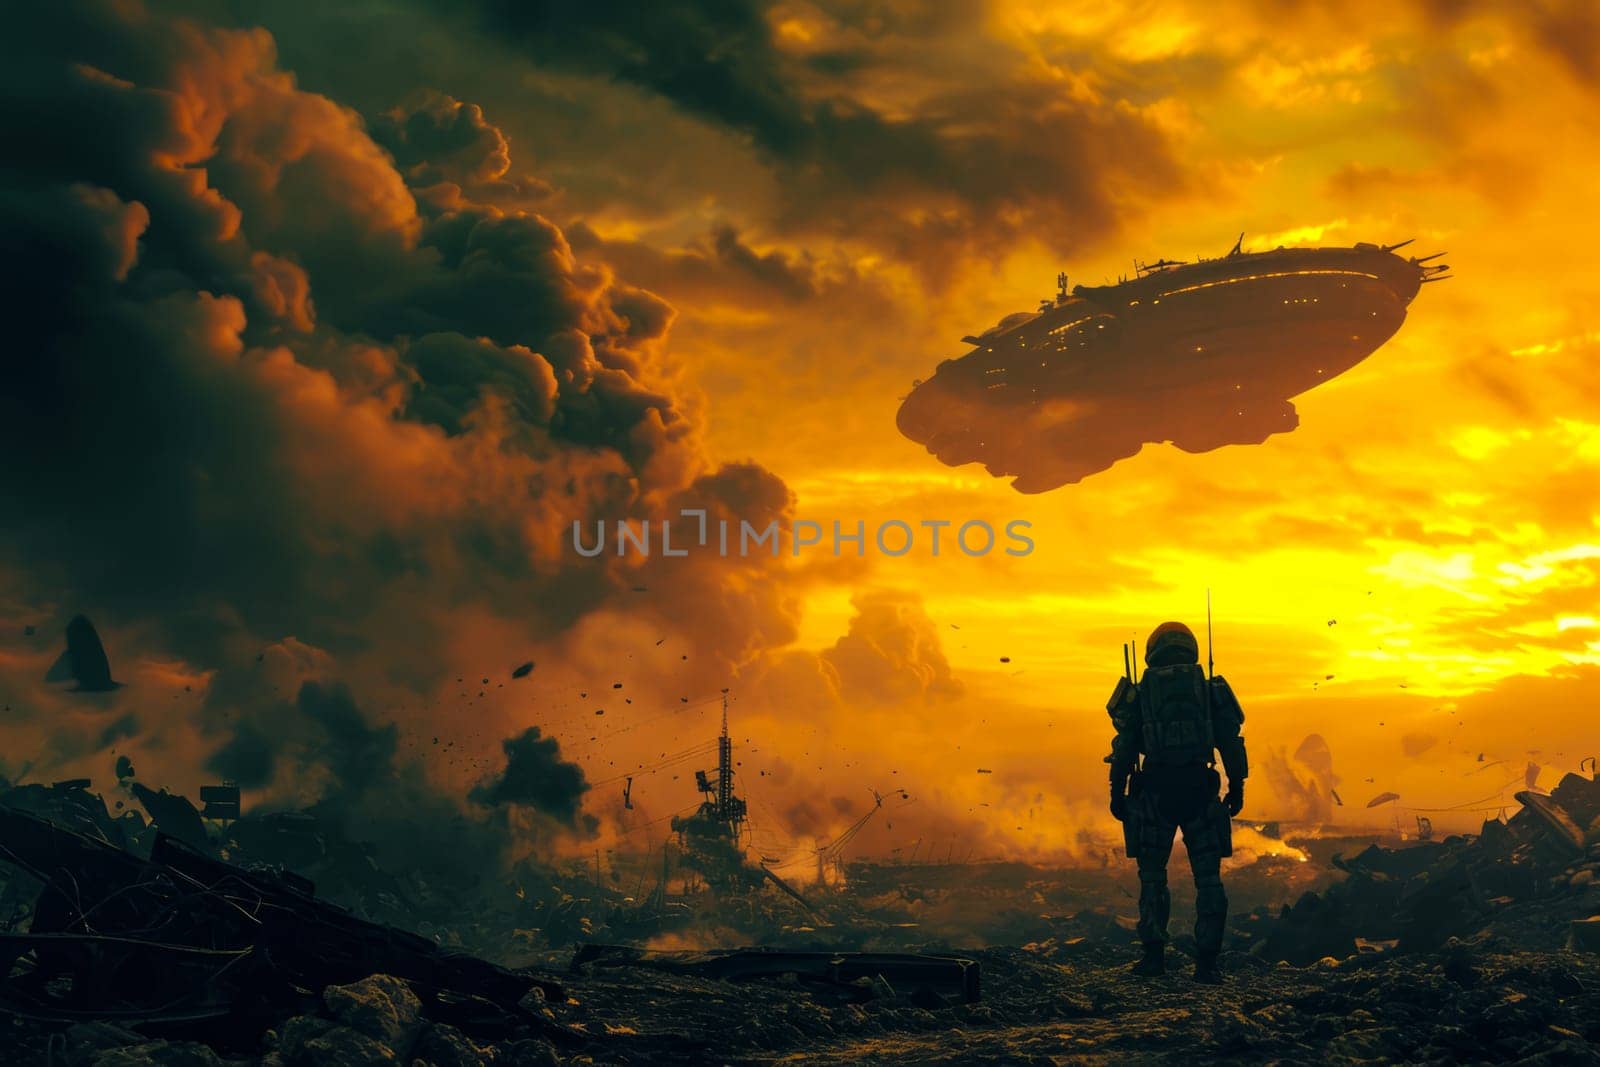 A man stands in a vast field while a spaceship hovers in the sky above him.